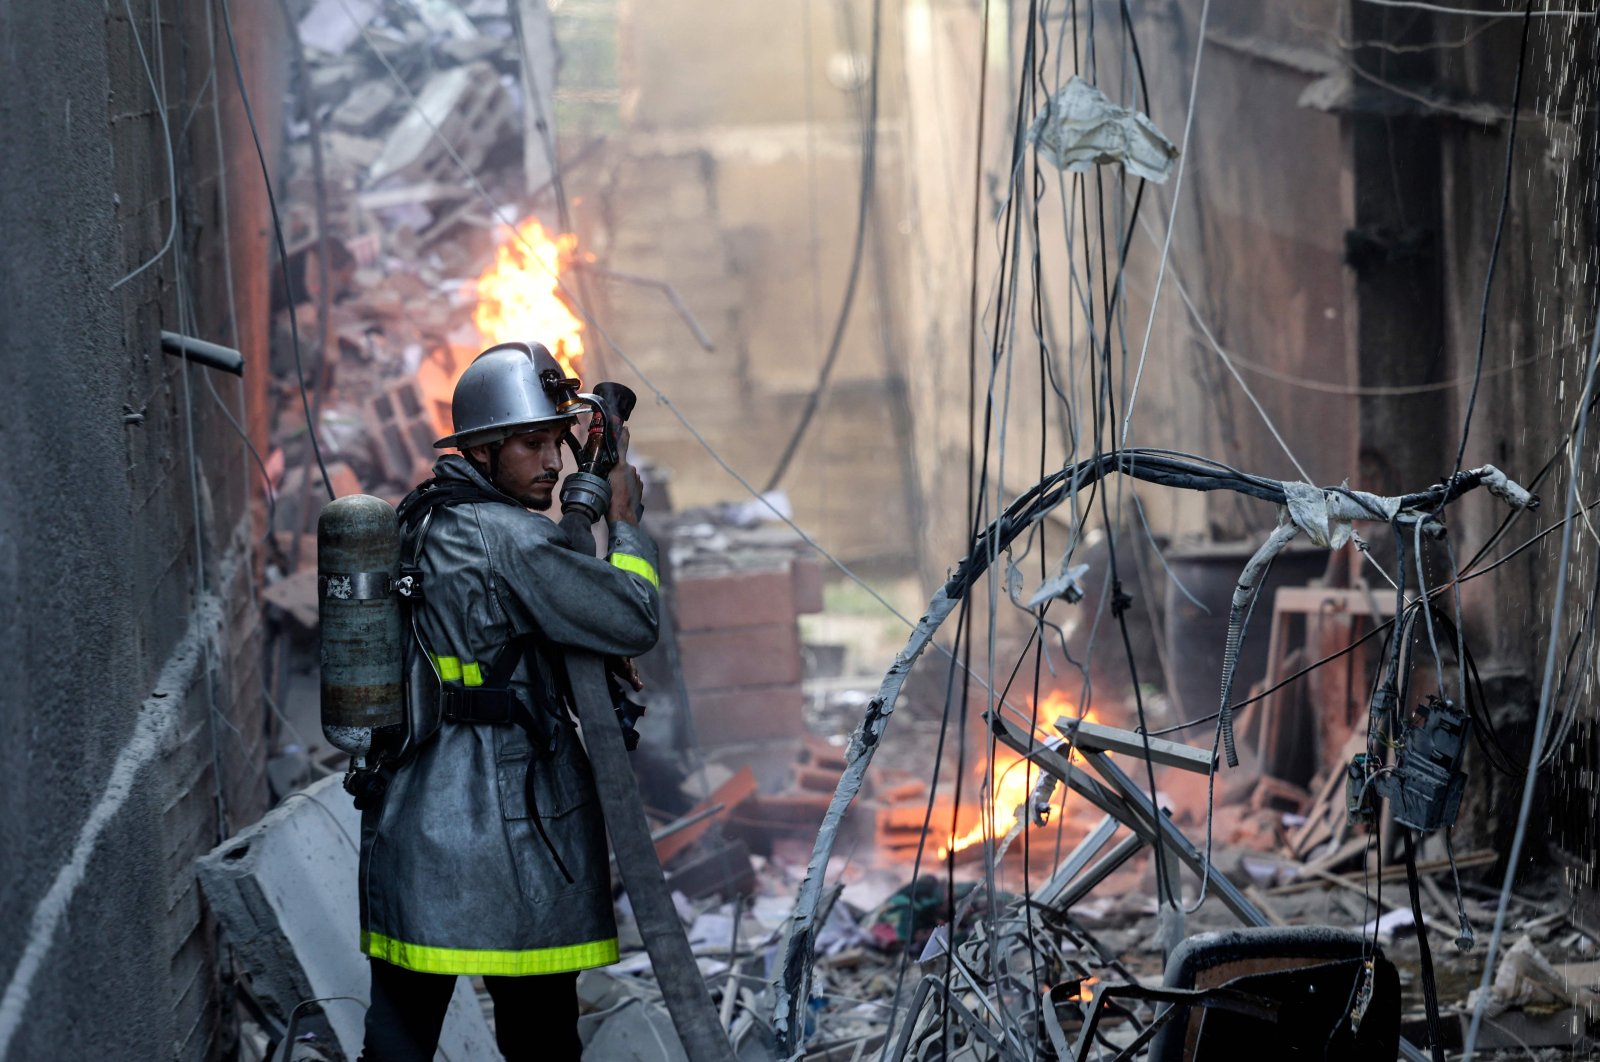 A Palestinian firefighter tackles the blaze amid the destruction following an Israeli air strike on Gaza City, Palestine, Aug. 5, 2022. (AFP Photo)